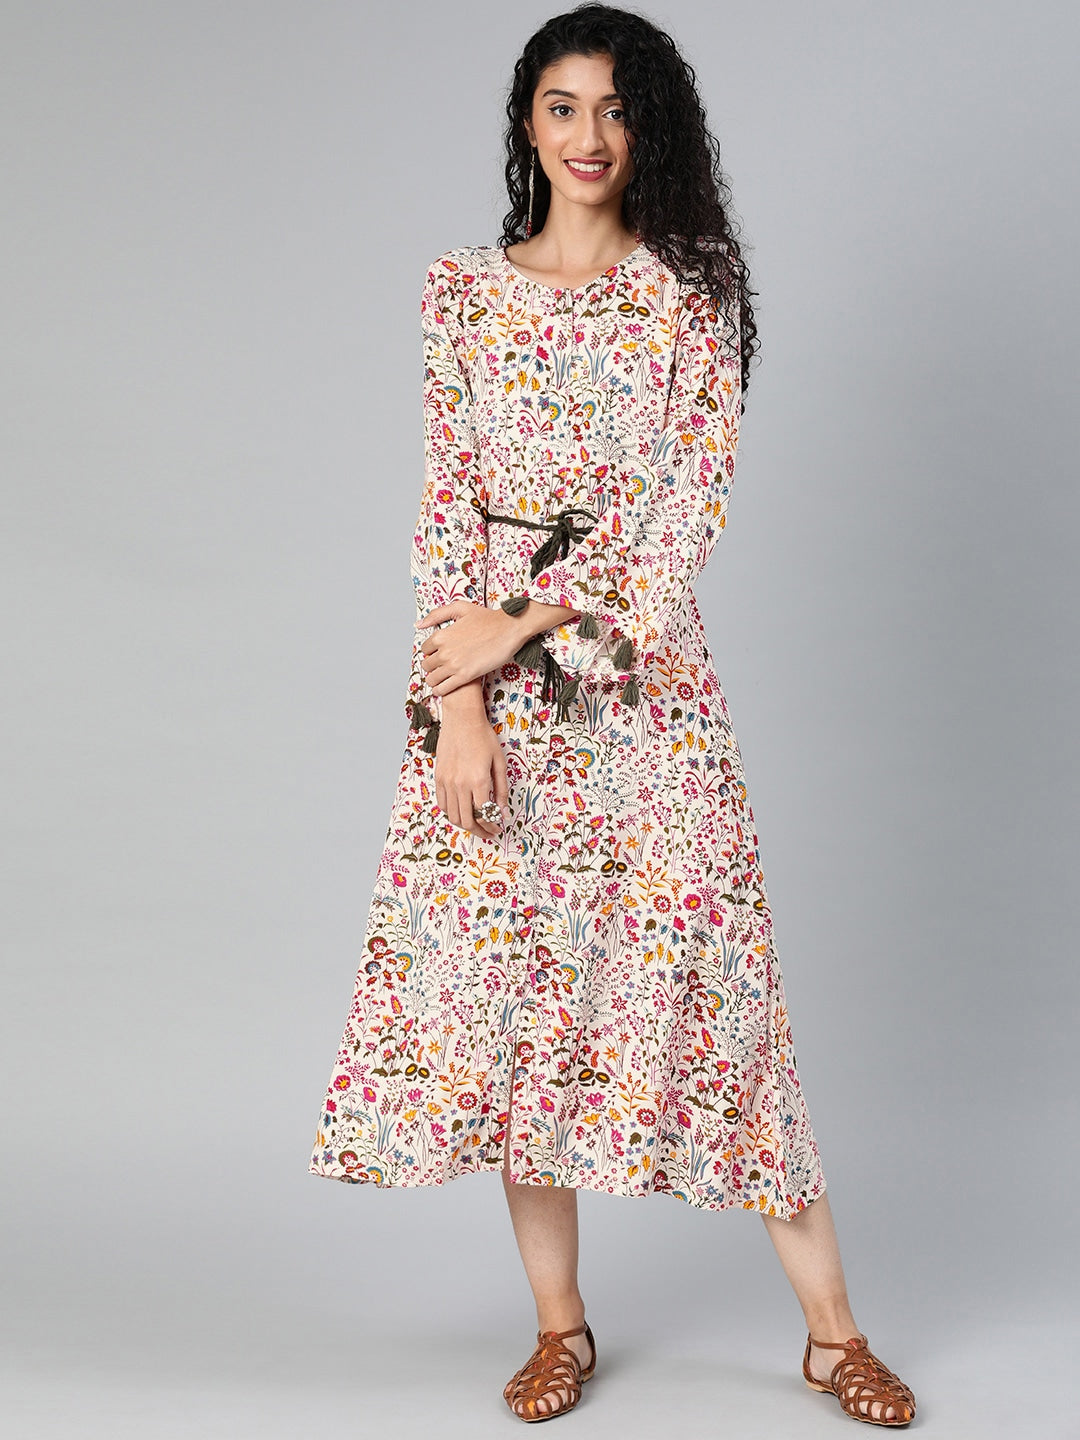 Off-White & Pink Printed Fit and Flare Dress With Tassel Detailing-Yufta Store-1832DRSWHS